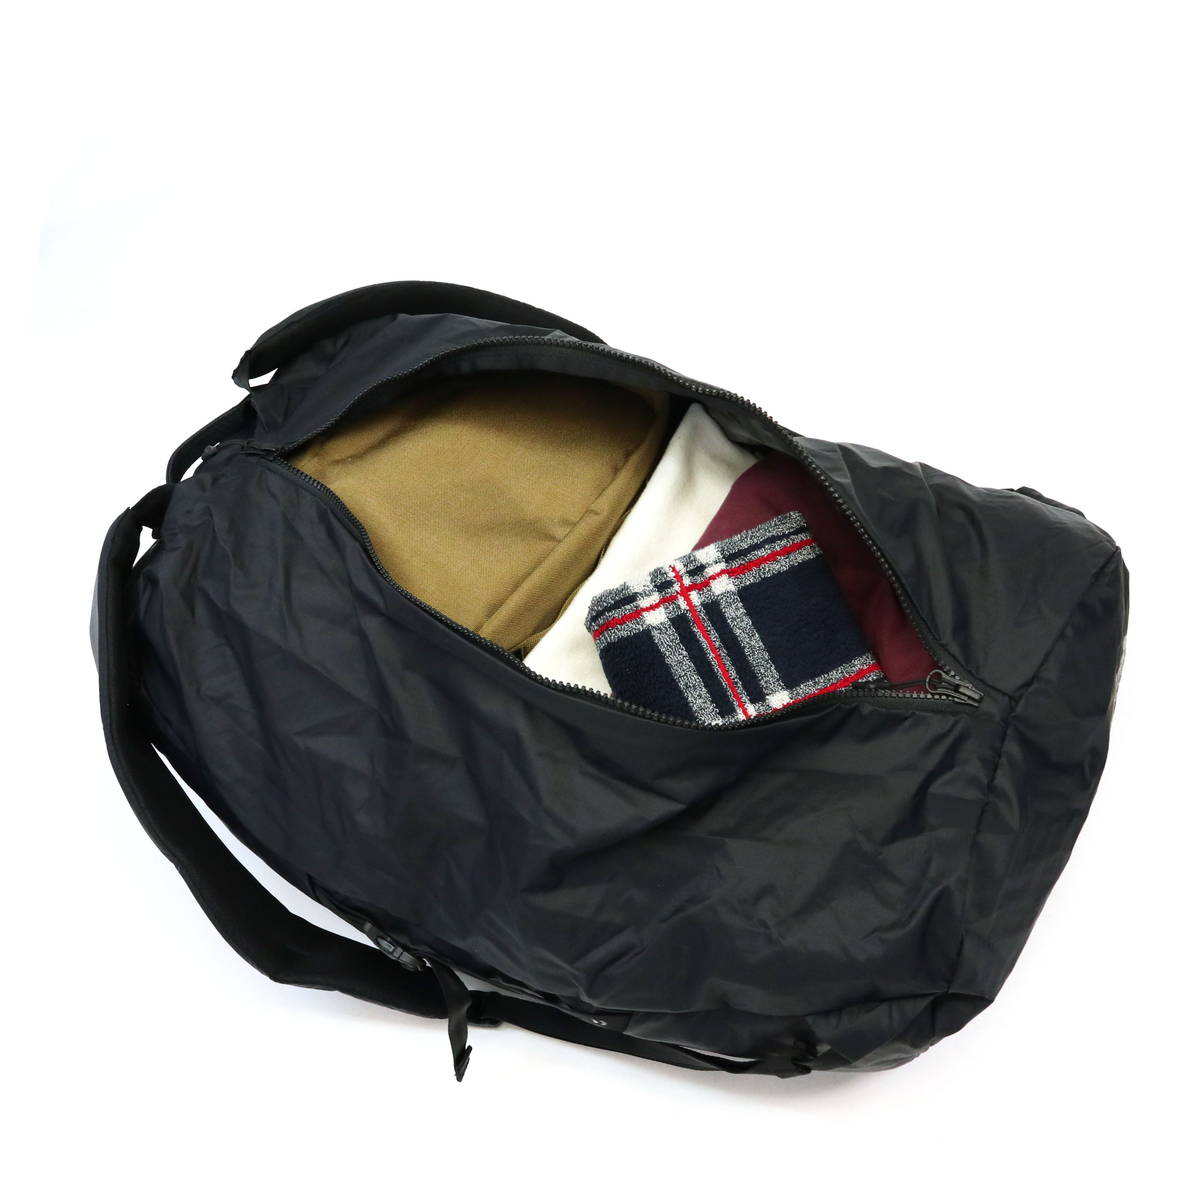 【The North Face】Glam Duffel 35L